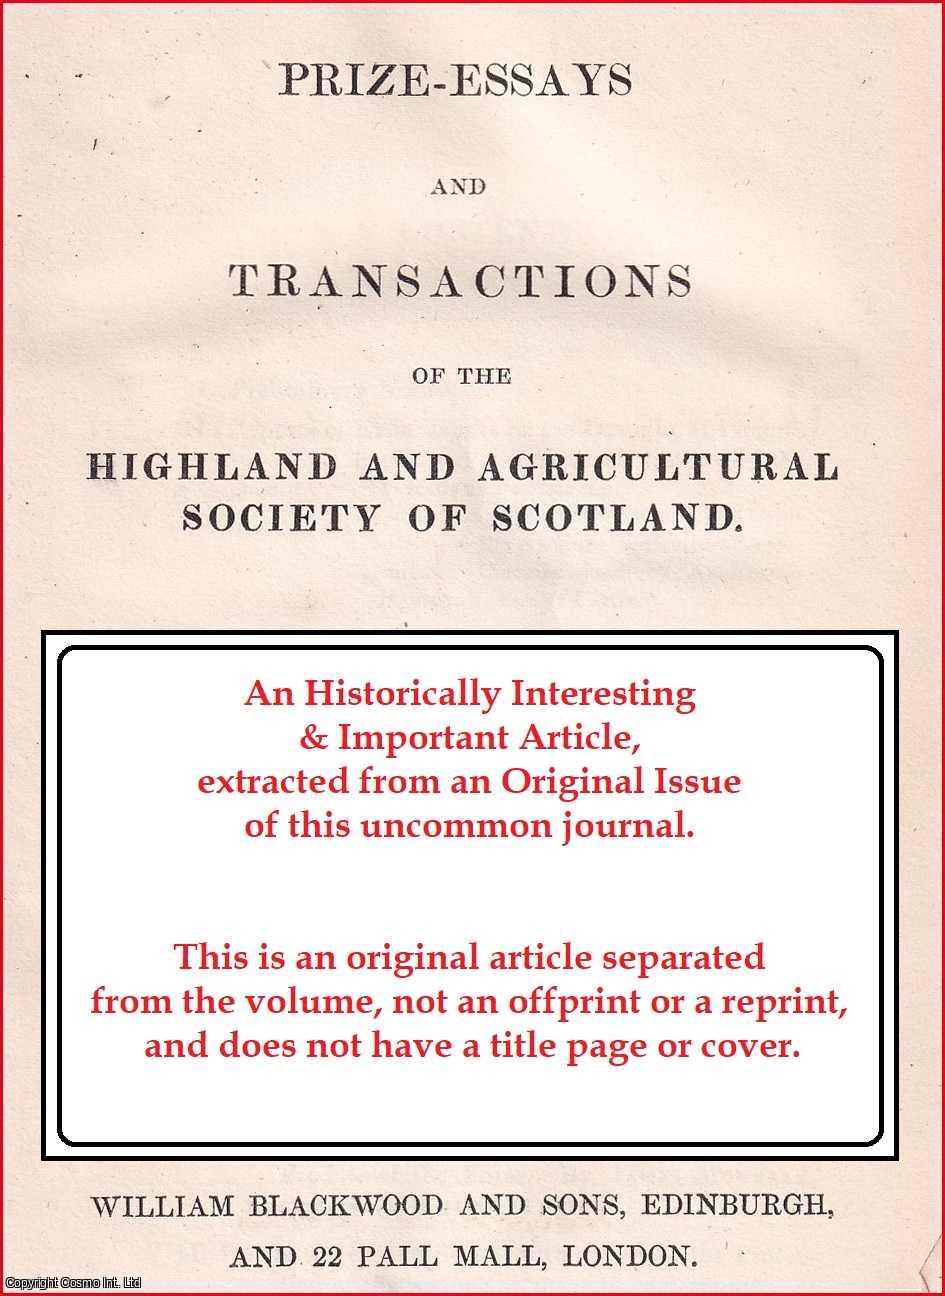 John Grey, Esq., Dilston, Northumberland. - Experiments with some of the Recently Introduced Manures. An uncommon original article from the Prize Essays and Transactions of the Highland Society of Scotland, 1843.